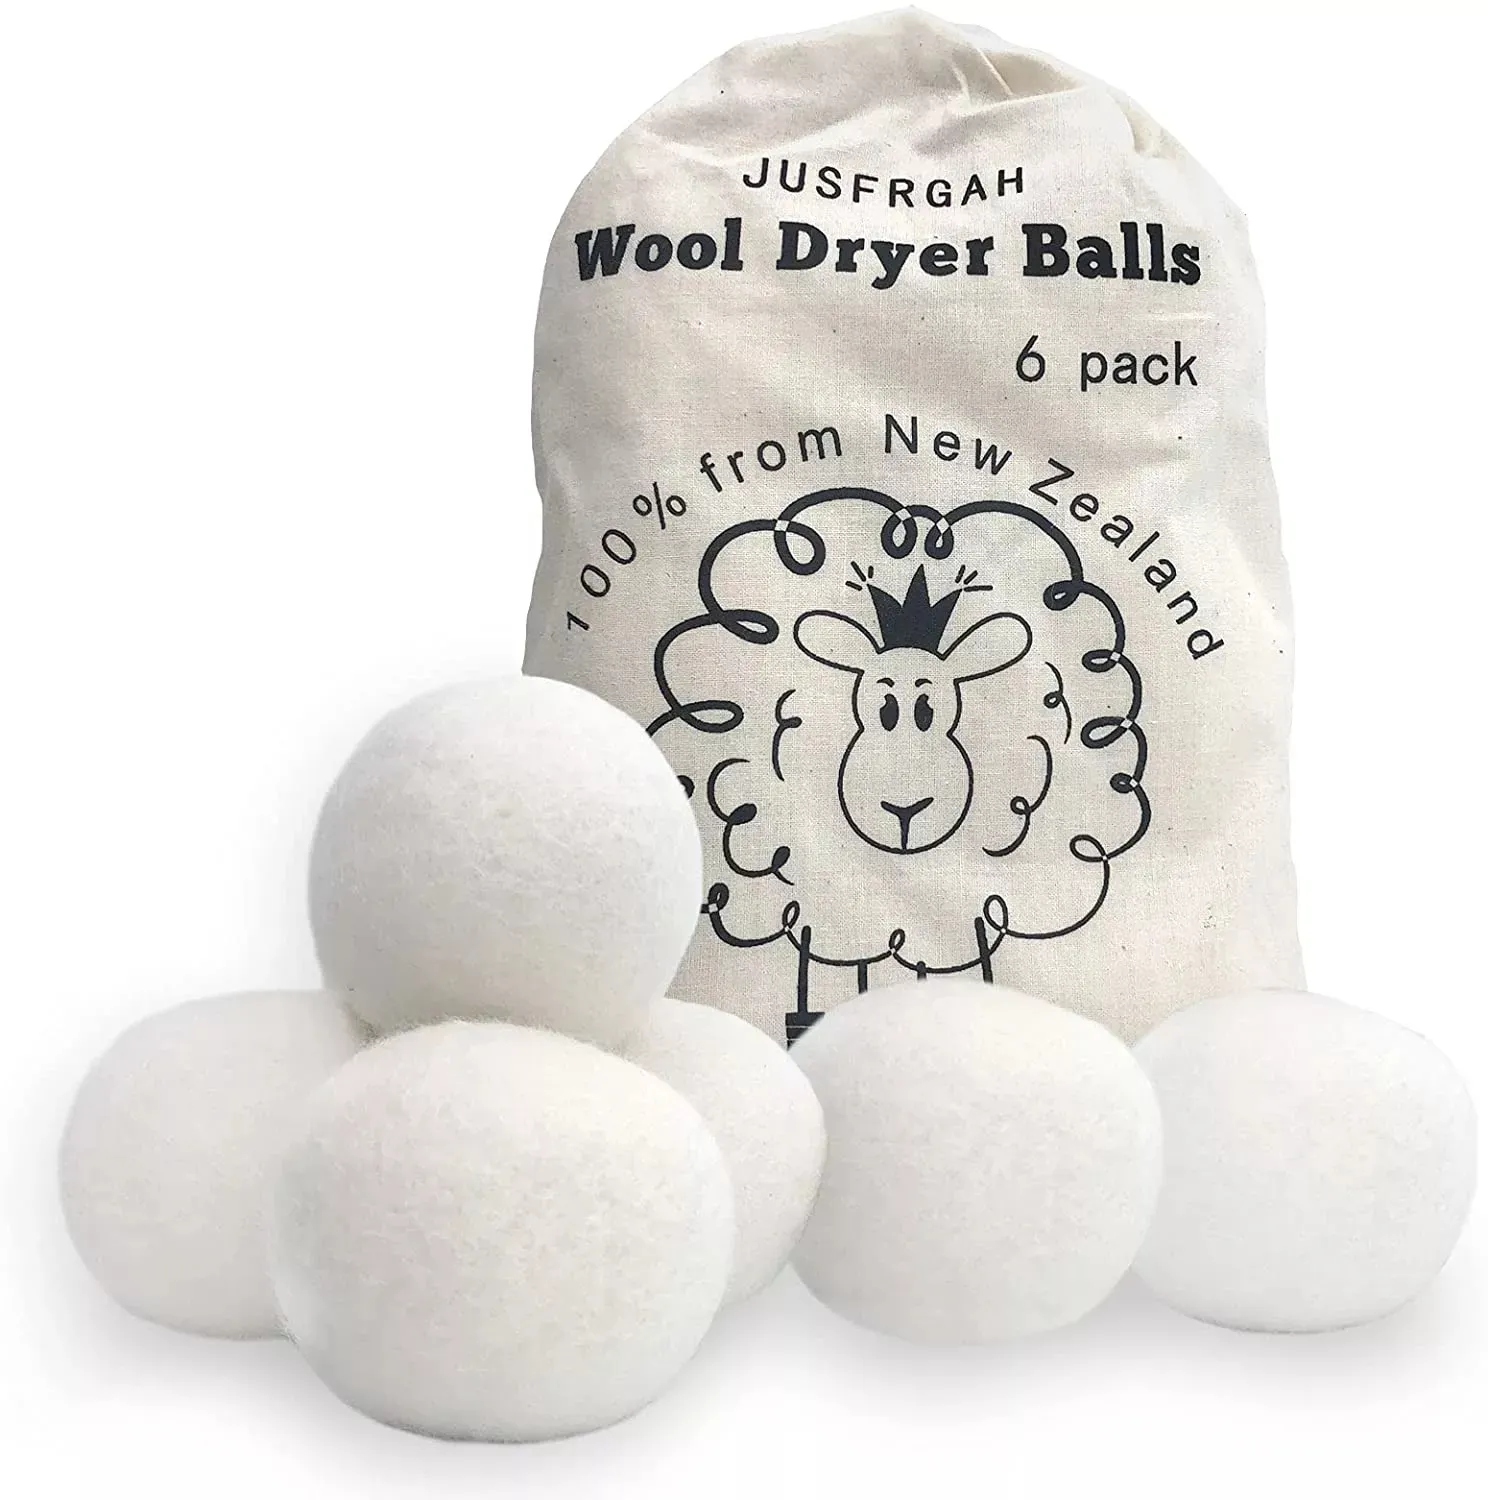 Free Sample Hot Sale Wool Drying Balls In Laundry Wool Balls For Dryer